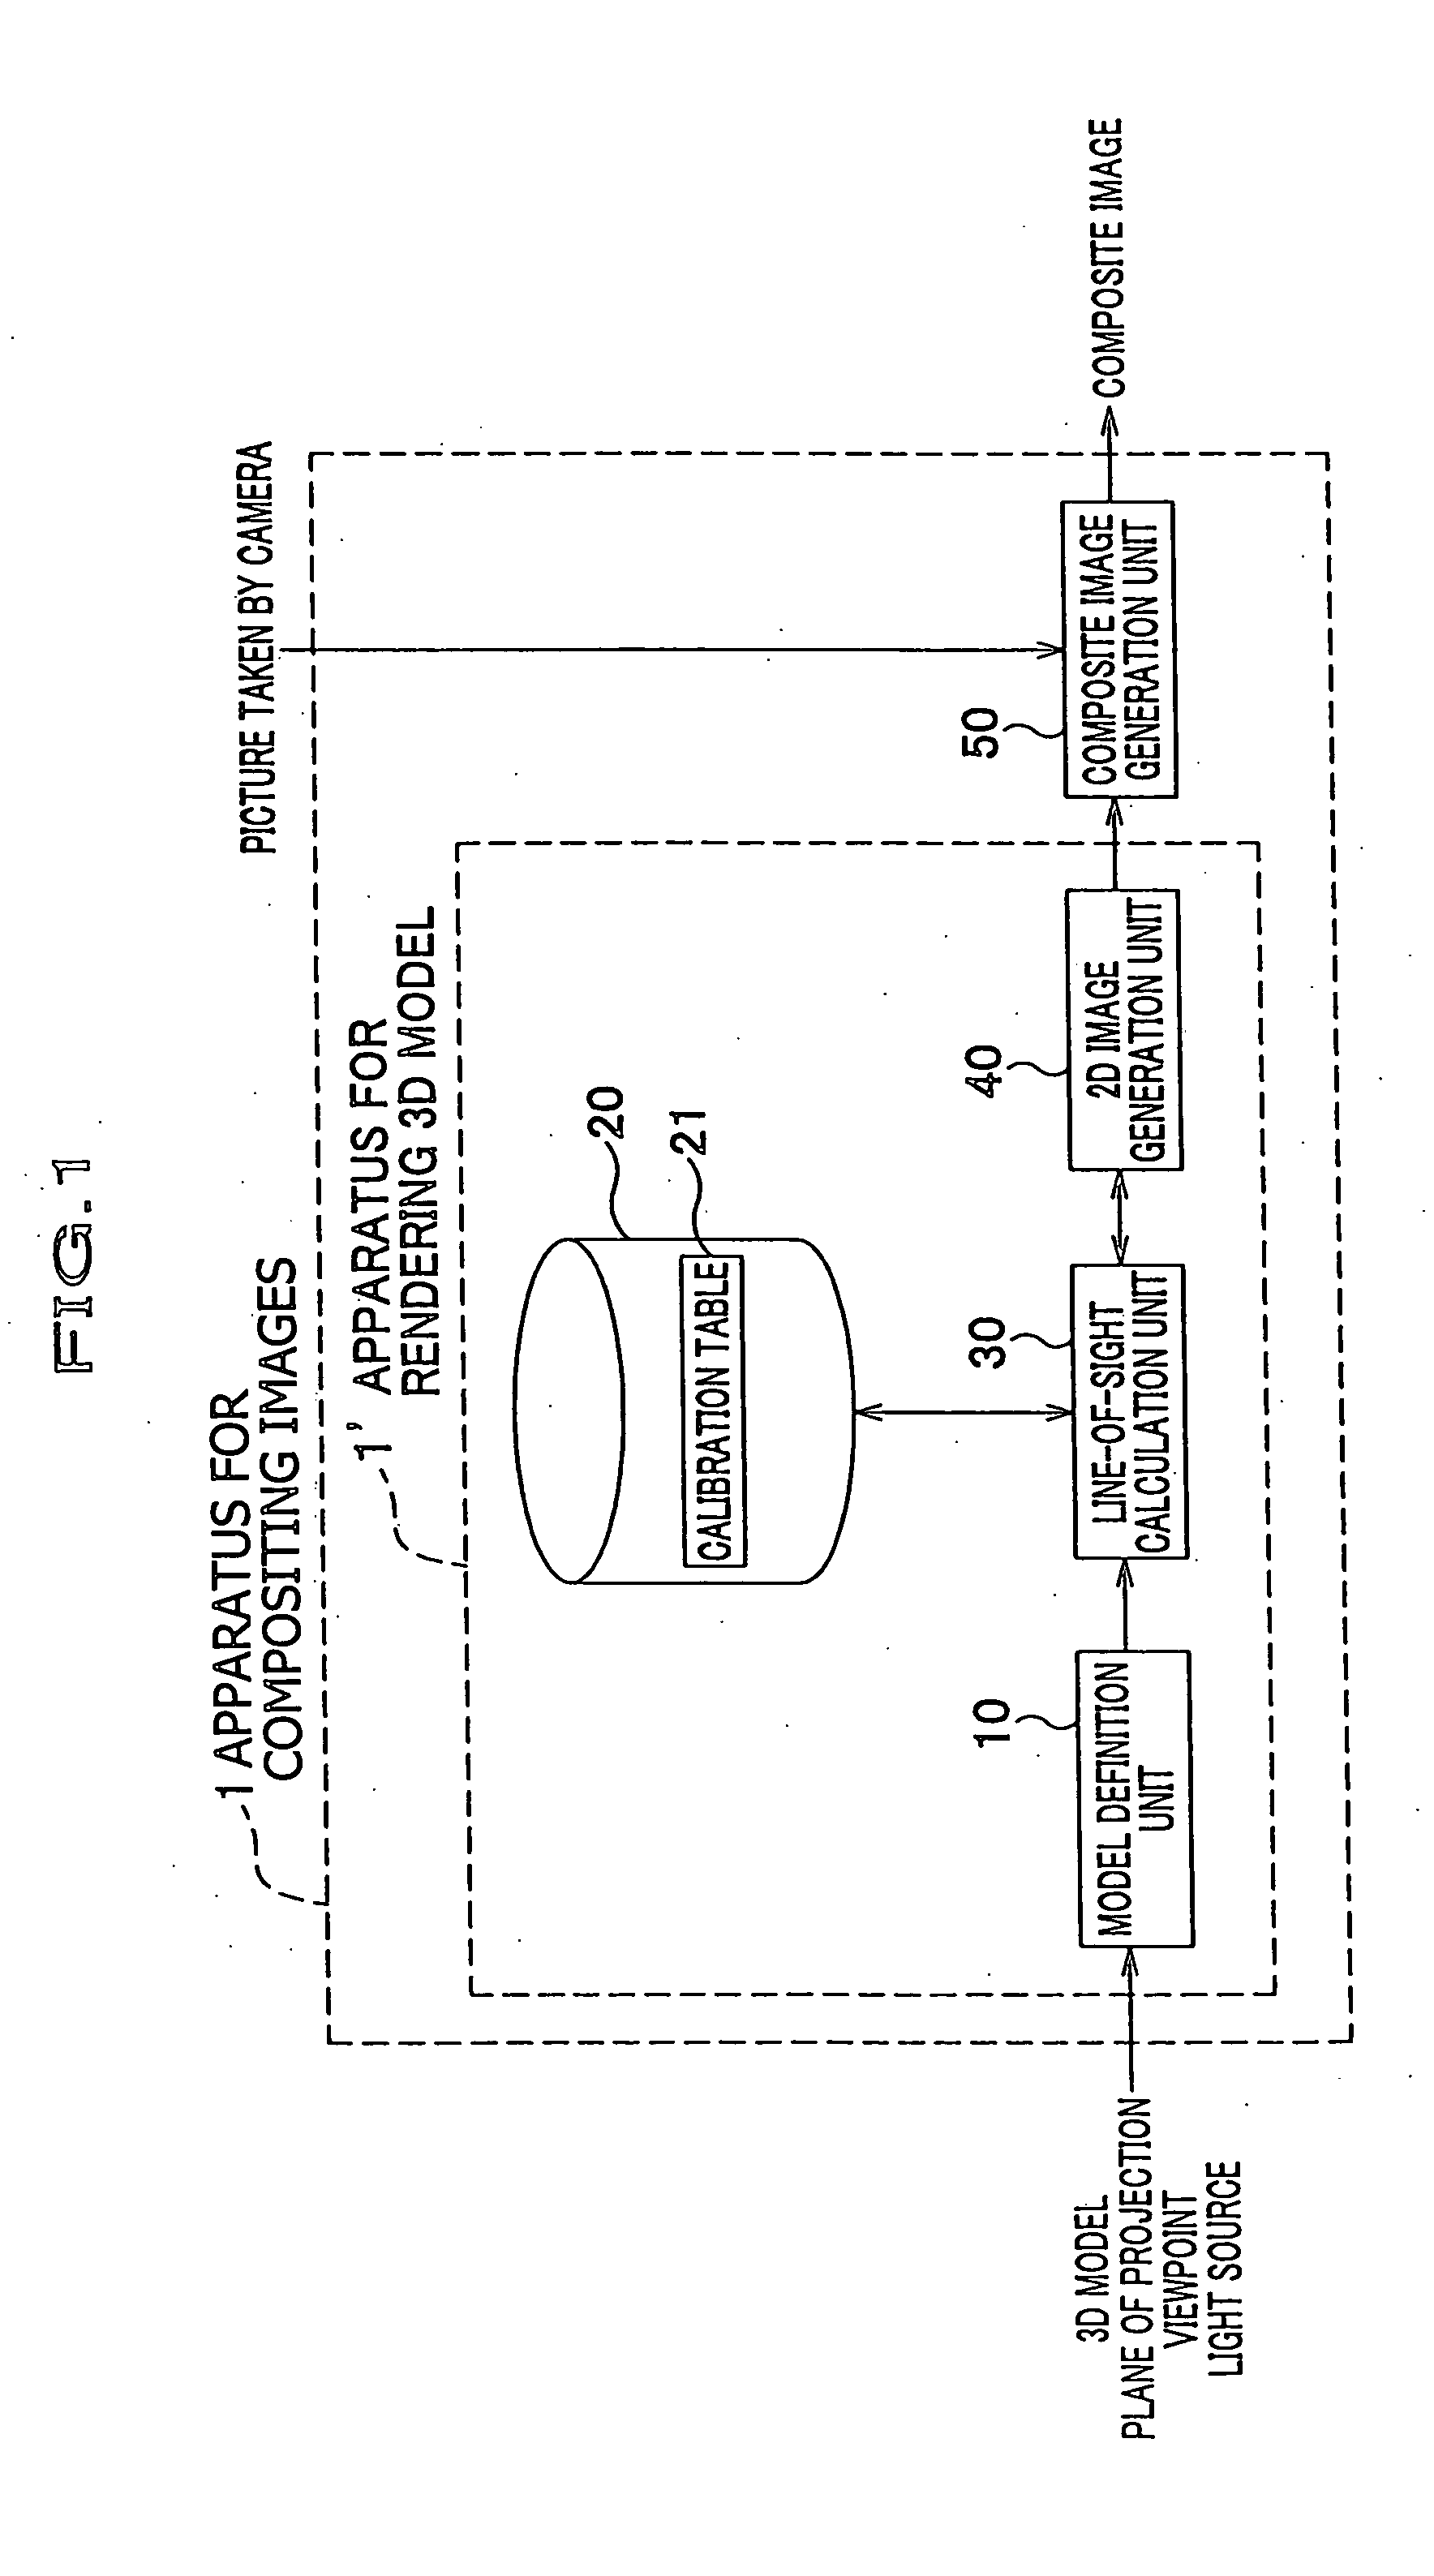 Method, apparatus and program for compositing images, and method, apparatus and program for rendering three-dimensional model